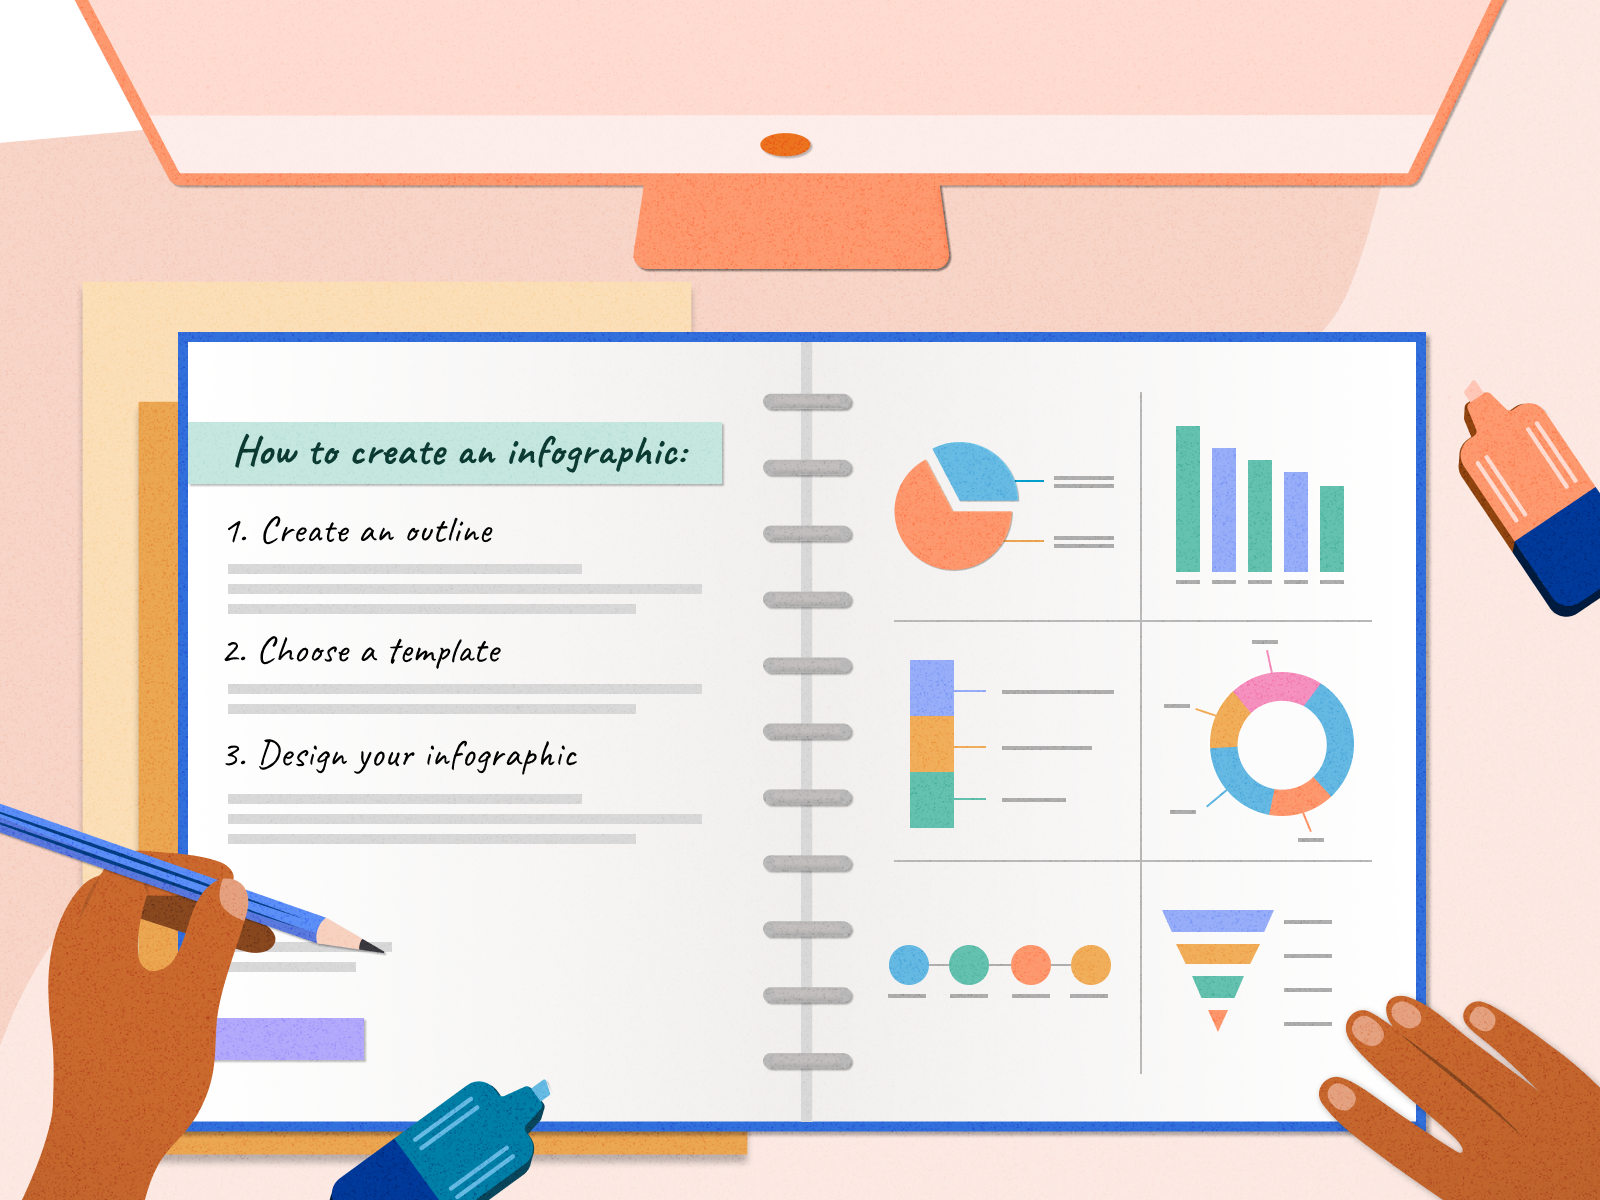 infographic designs overview examples and best practices